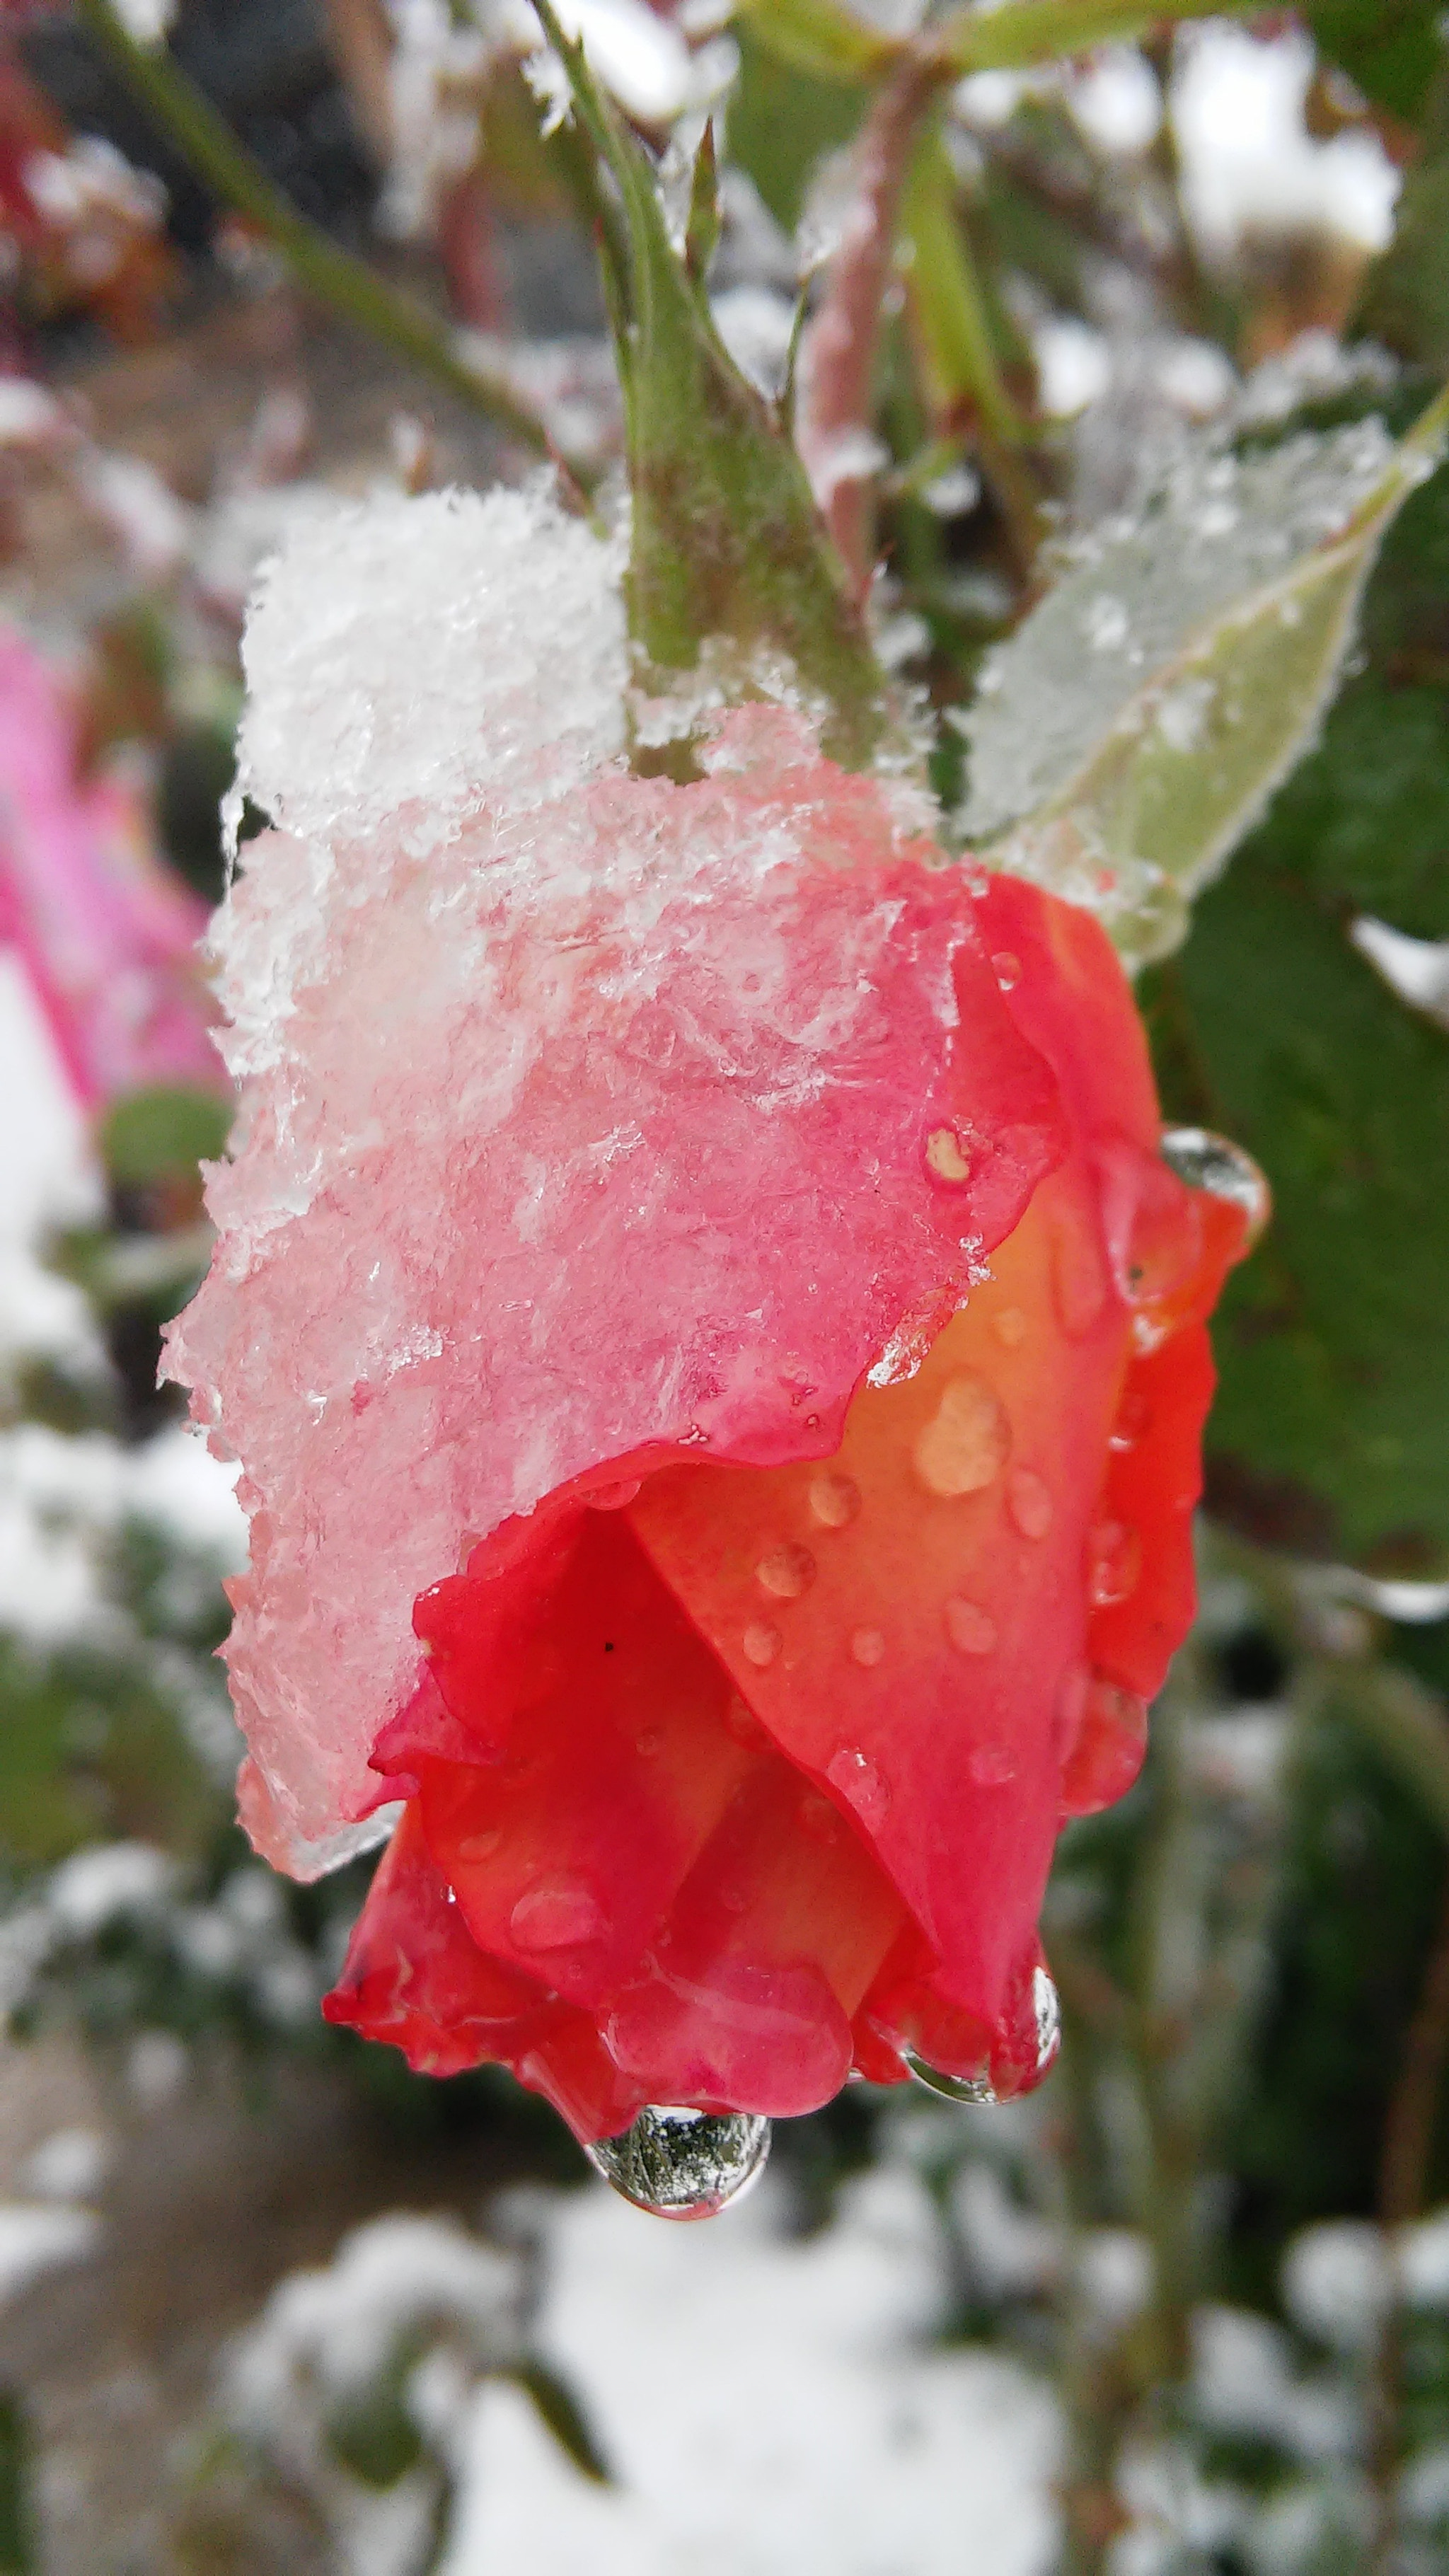 LG G3 S sample photo. Rose in the snow photography